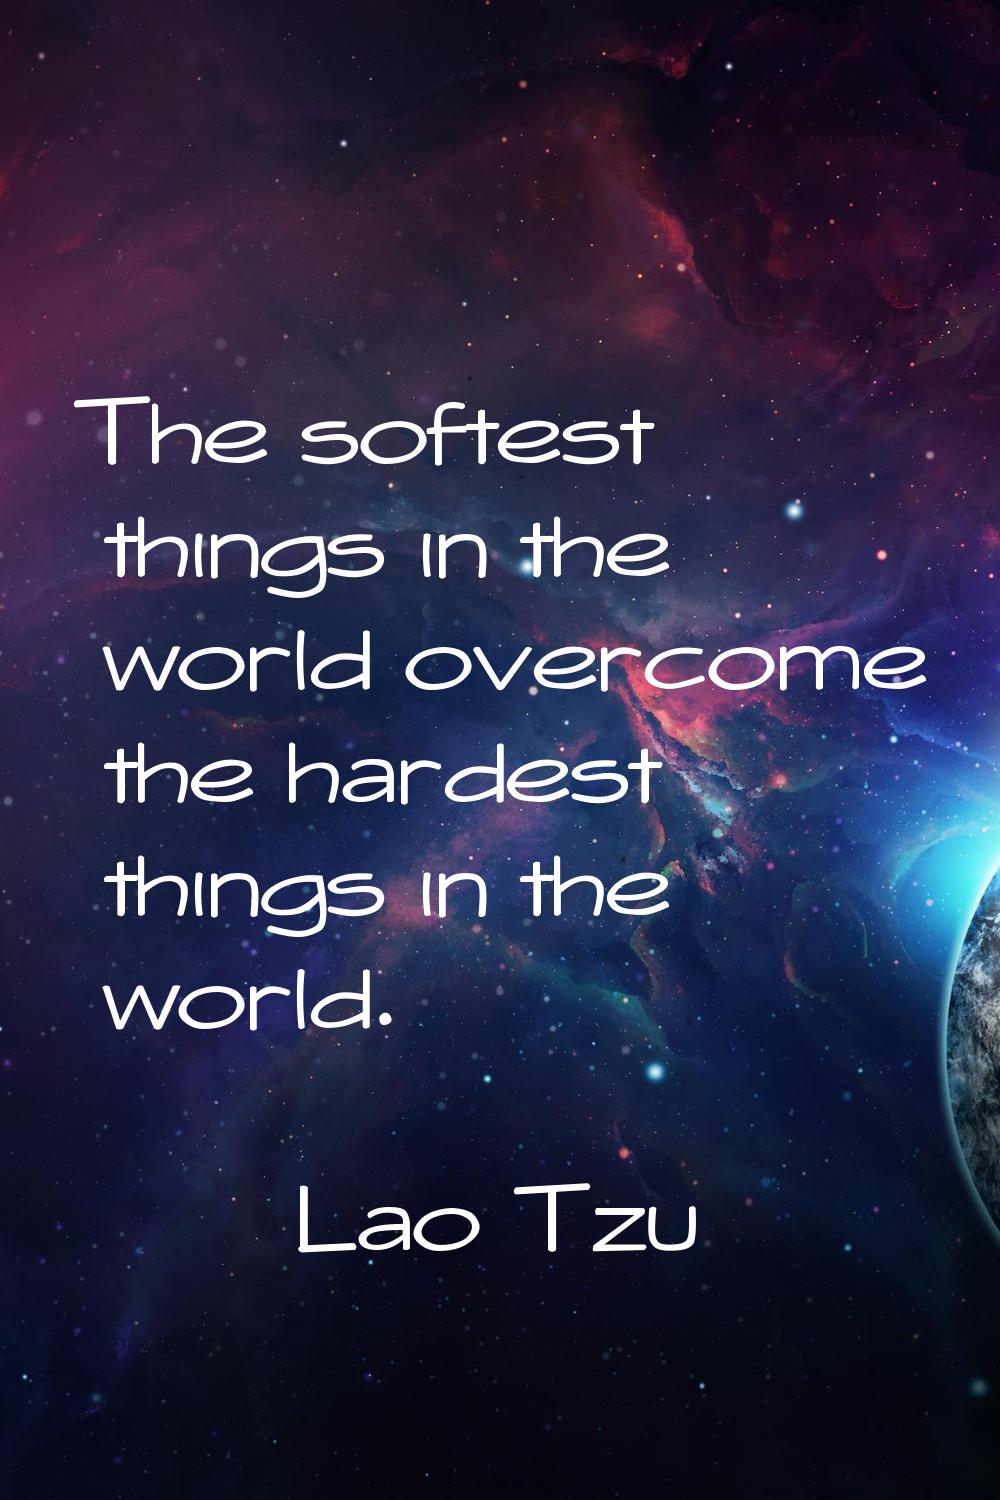 The softest things in the world overcome the hardest things in the world.